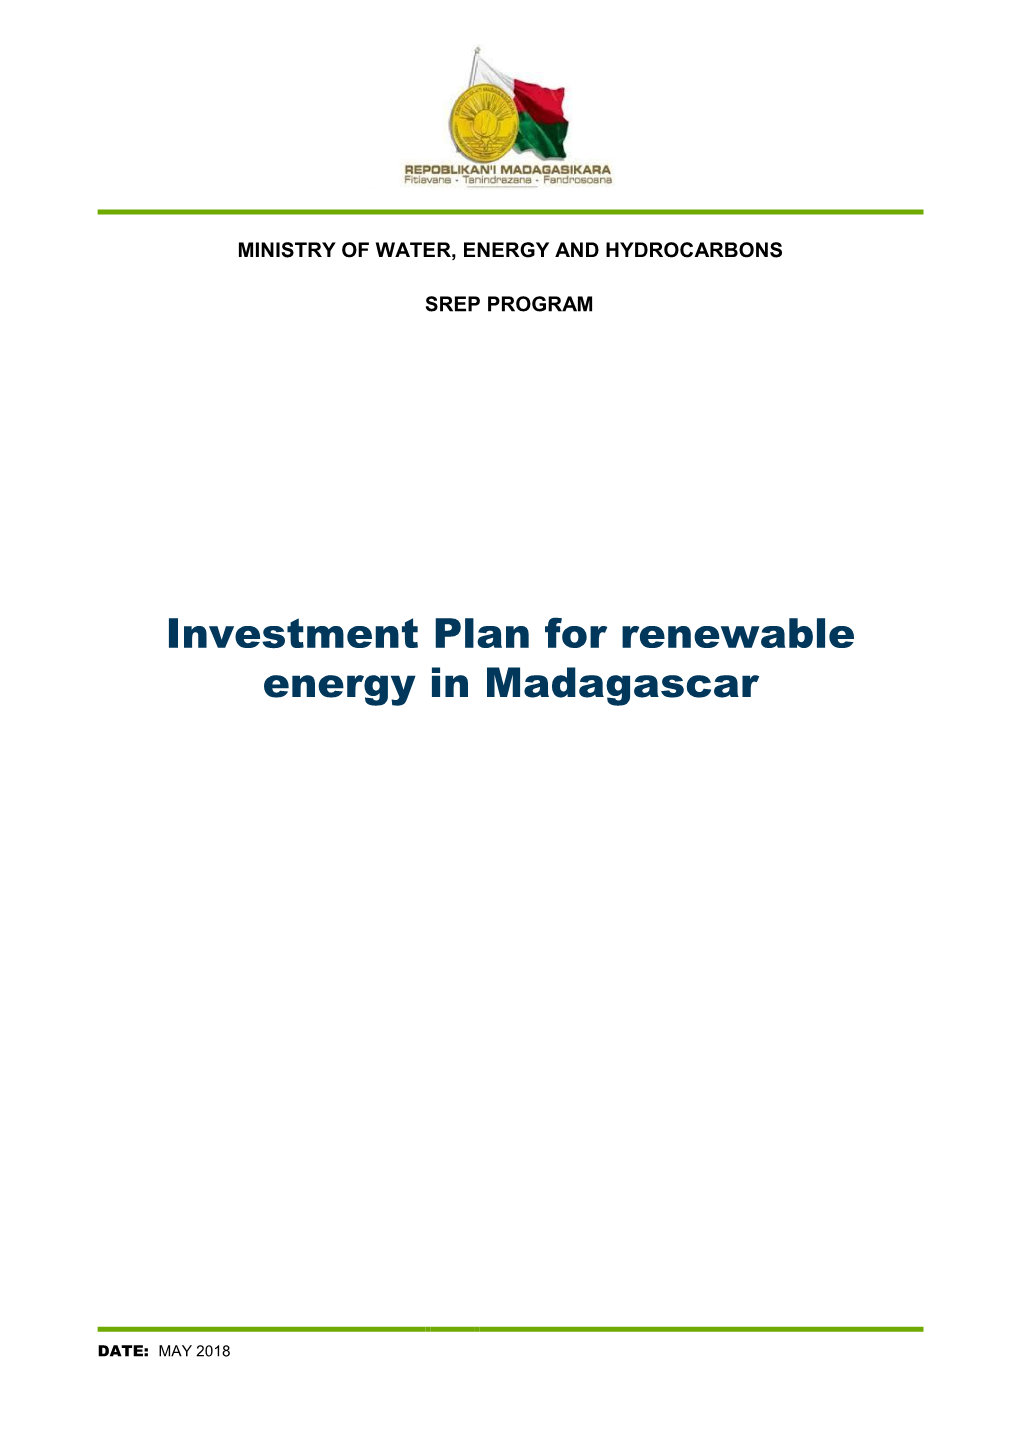 Investment Plan for Renewable Energy in Madagascar